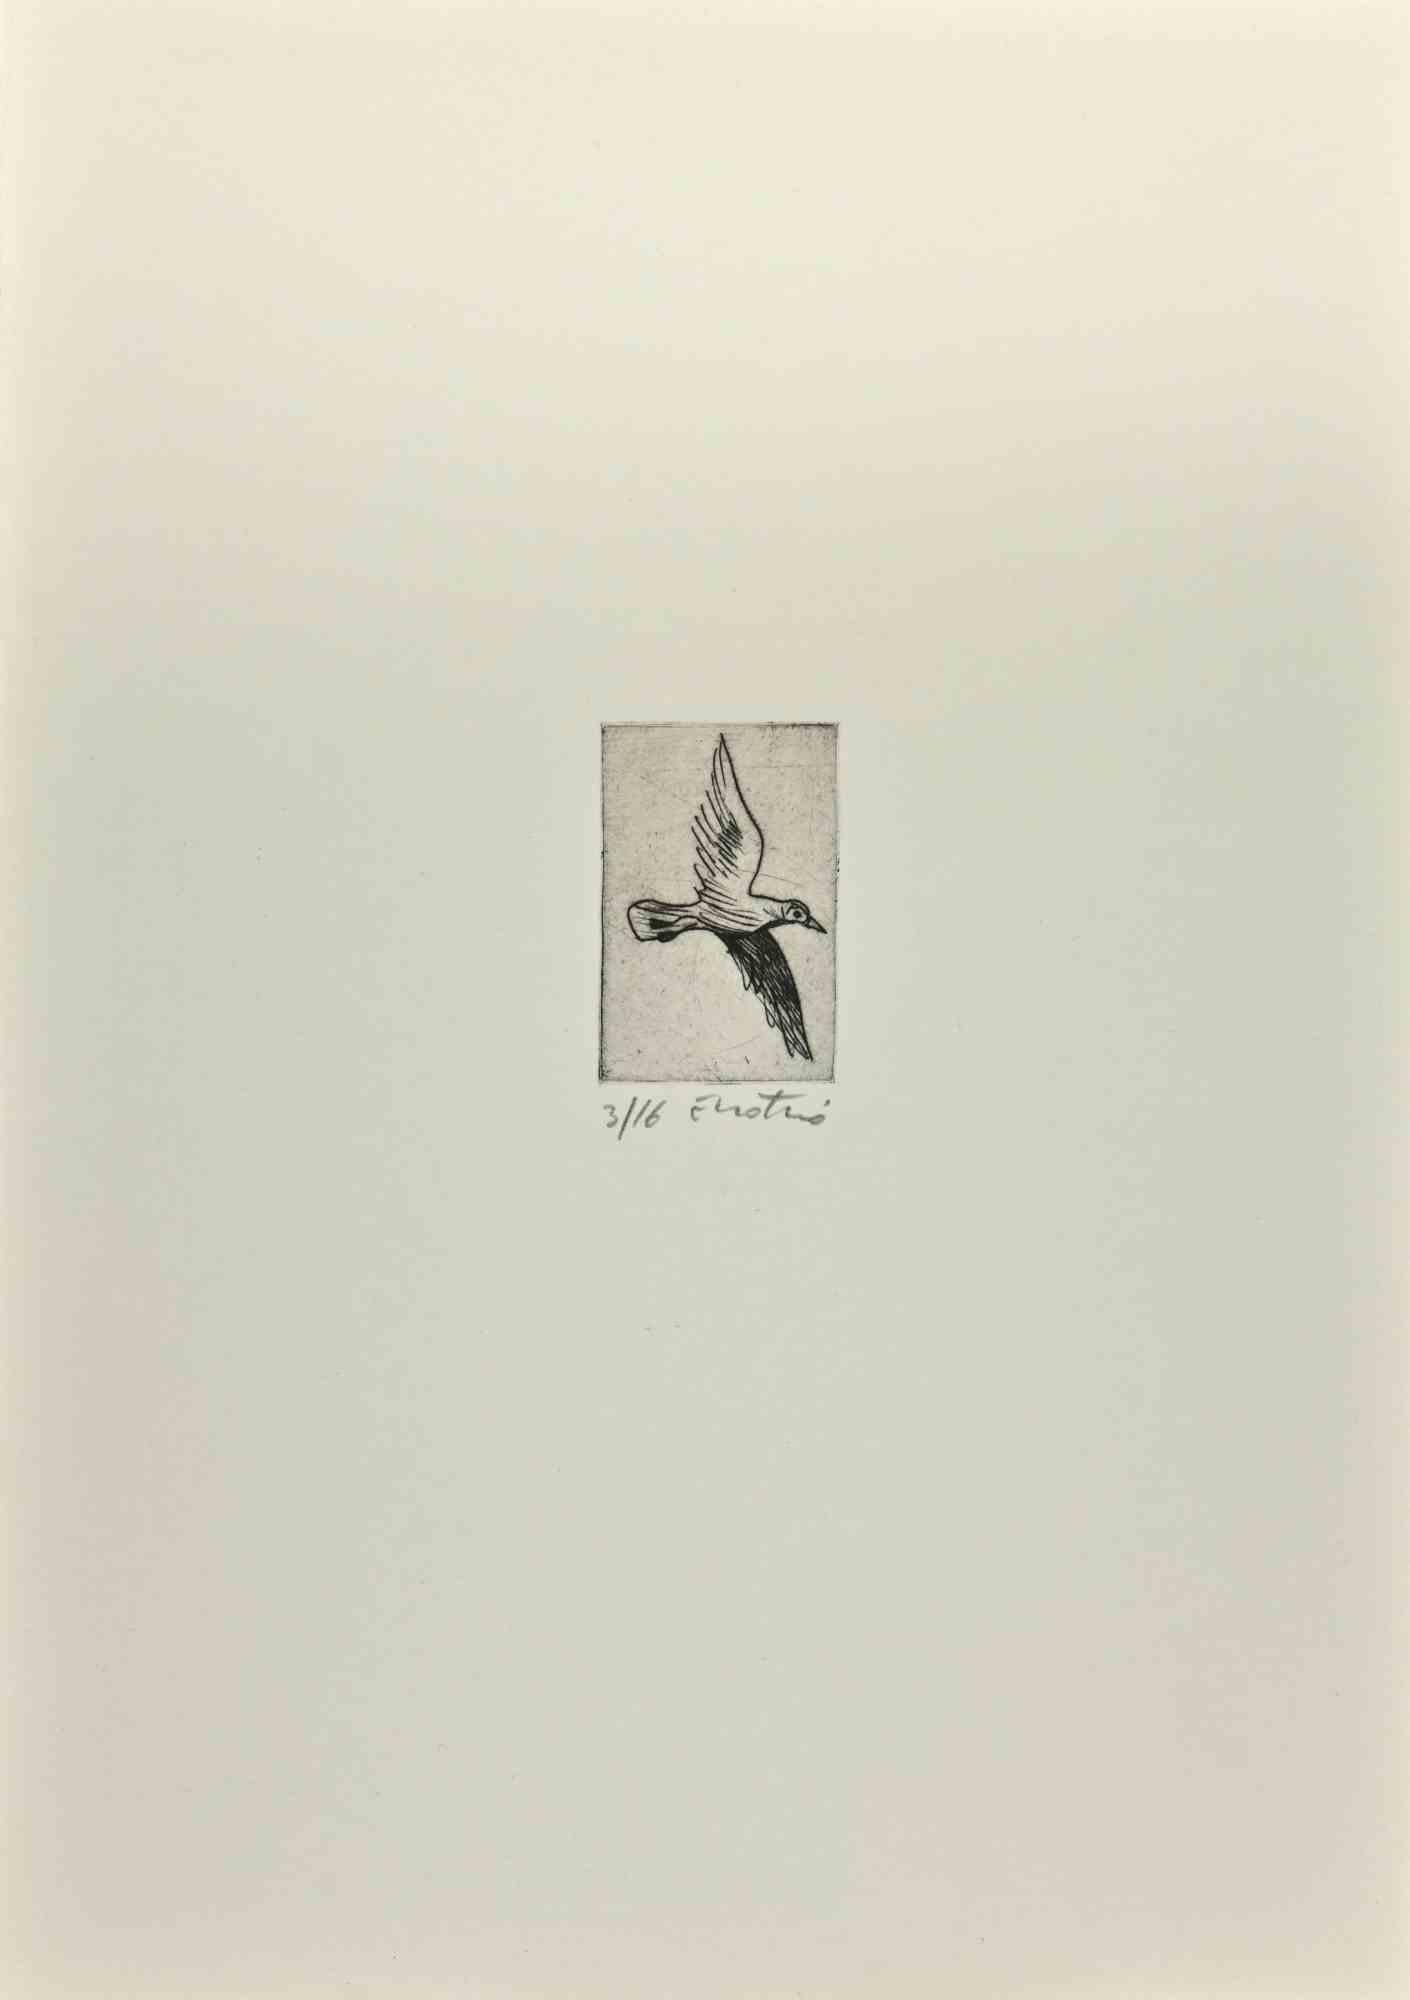 Dove is anEtching realized by Enotrio Pugliese in 1963.

Limited edition of 16 copies numbered and signed by the artist.

Good condition on a white cardboard.

Enotrio Pugliese (May 11, 1920 - August 1989) was an Italian painter. Born in Buenos